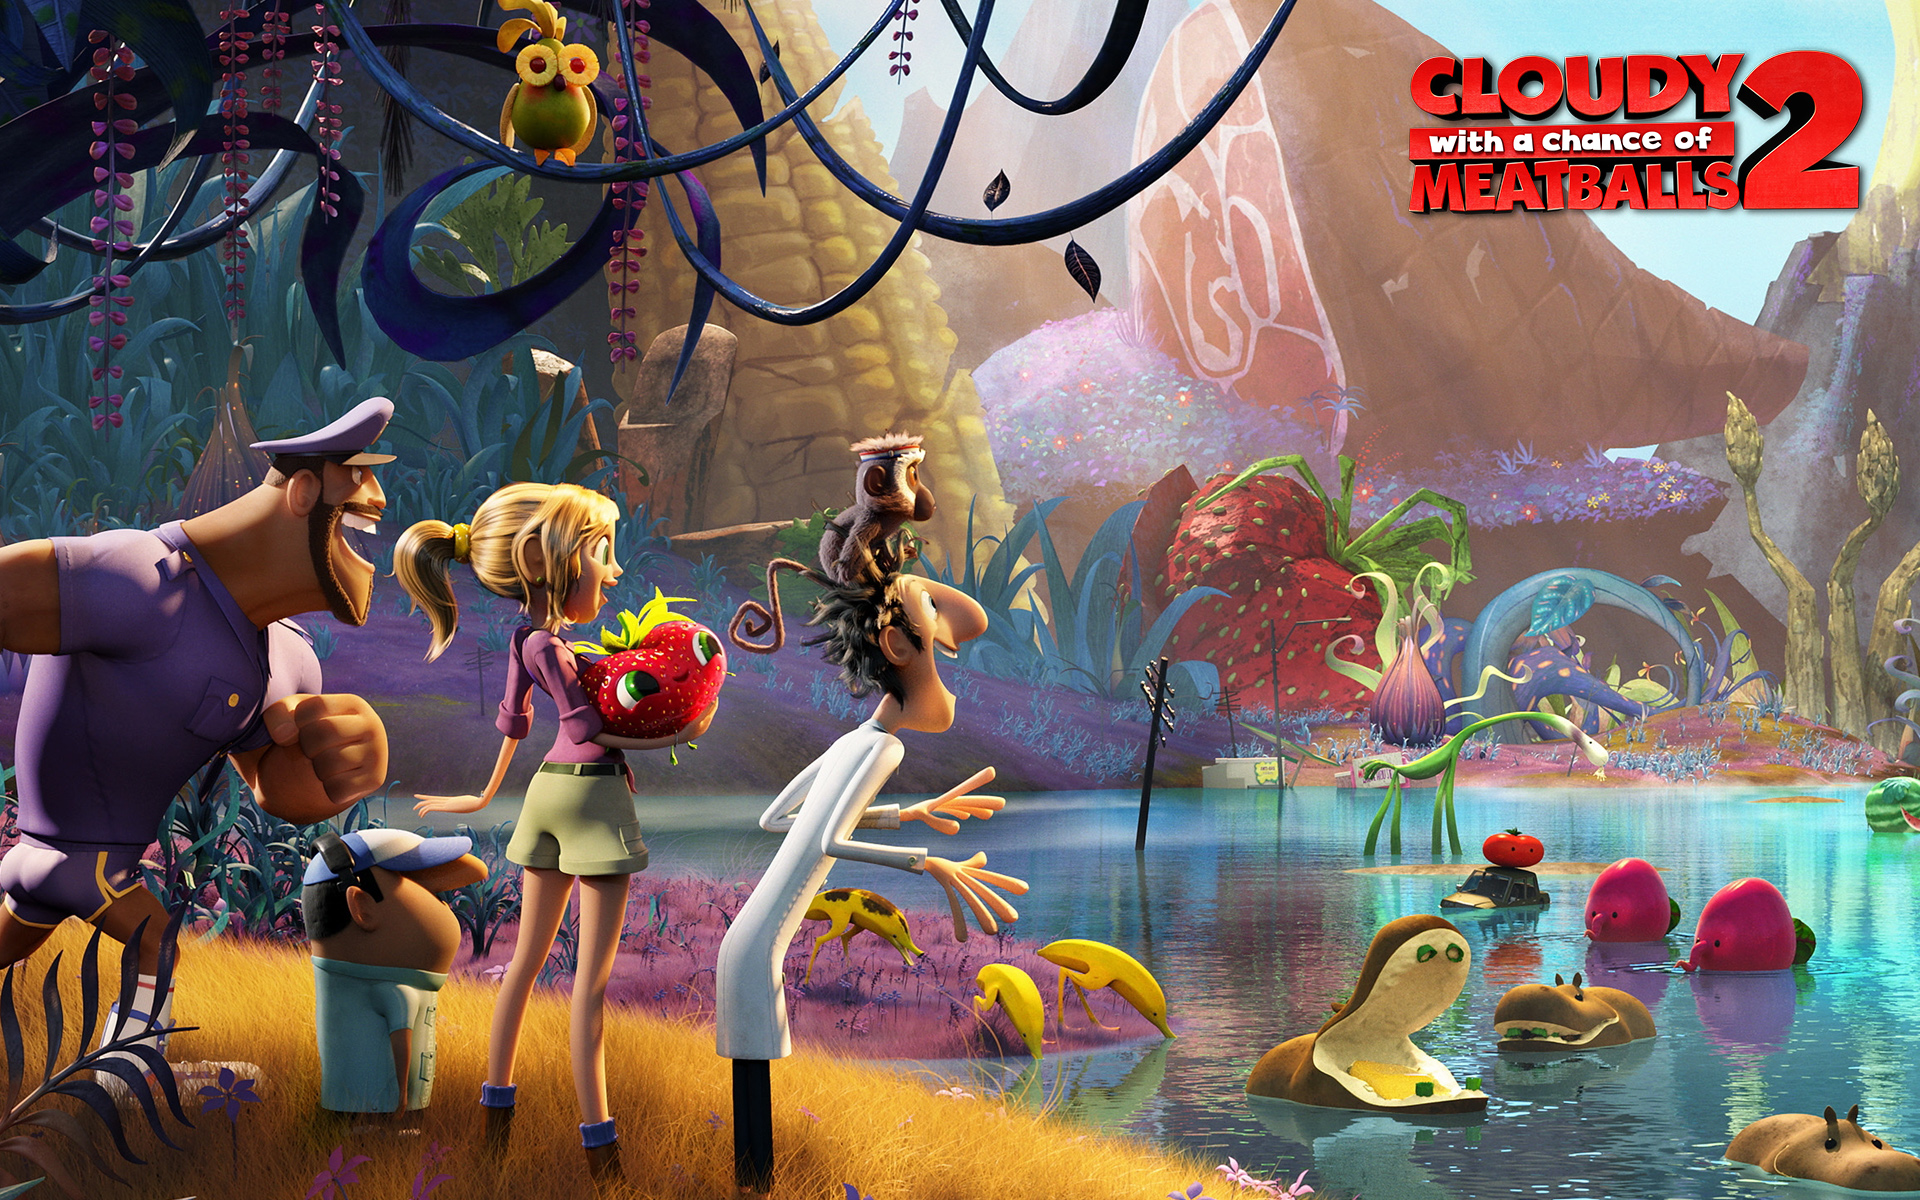 Cloudy With A Chance Of Meatballs 2 Backgrounds, Compatible - PC, Mobile, Gadgets| 1920x1200 px